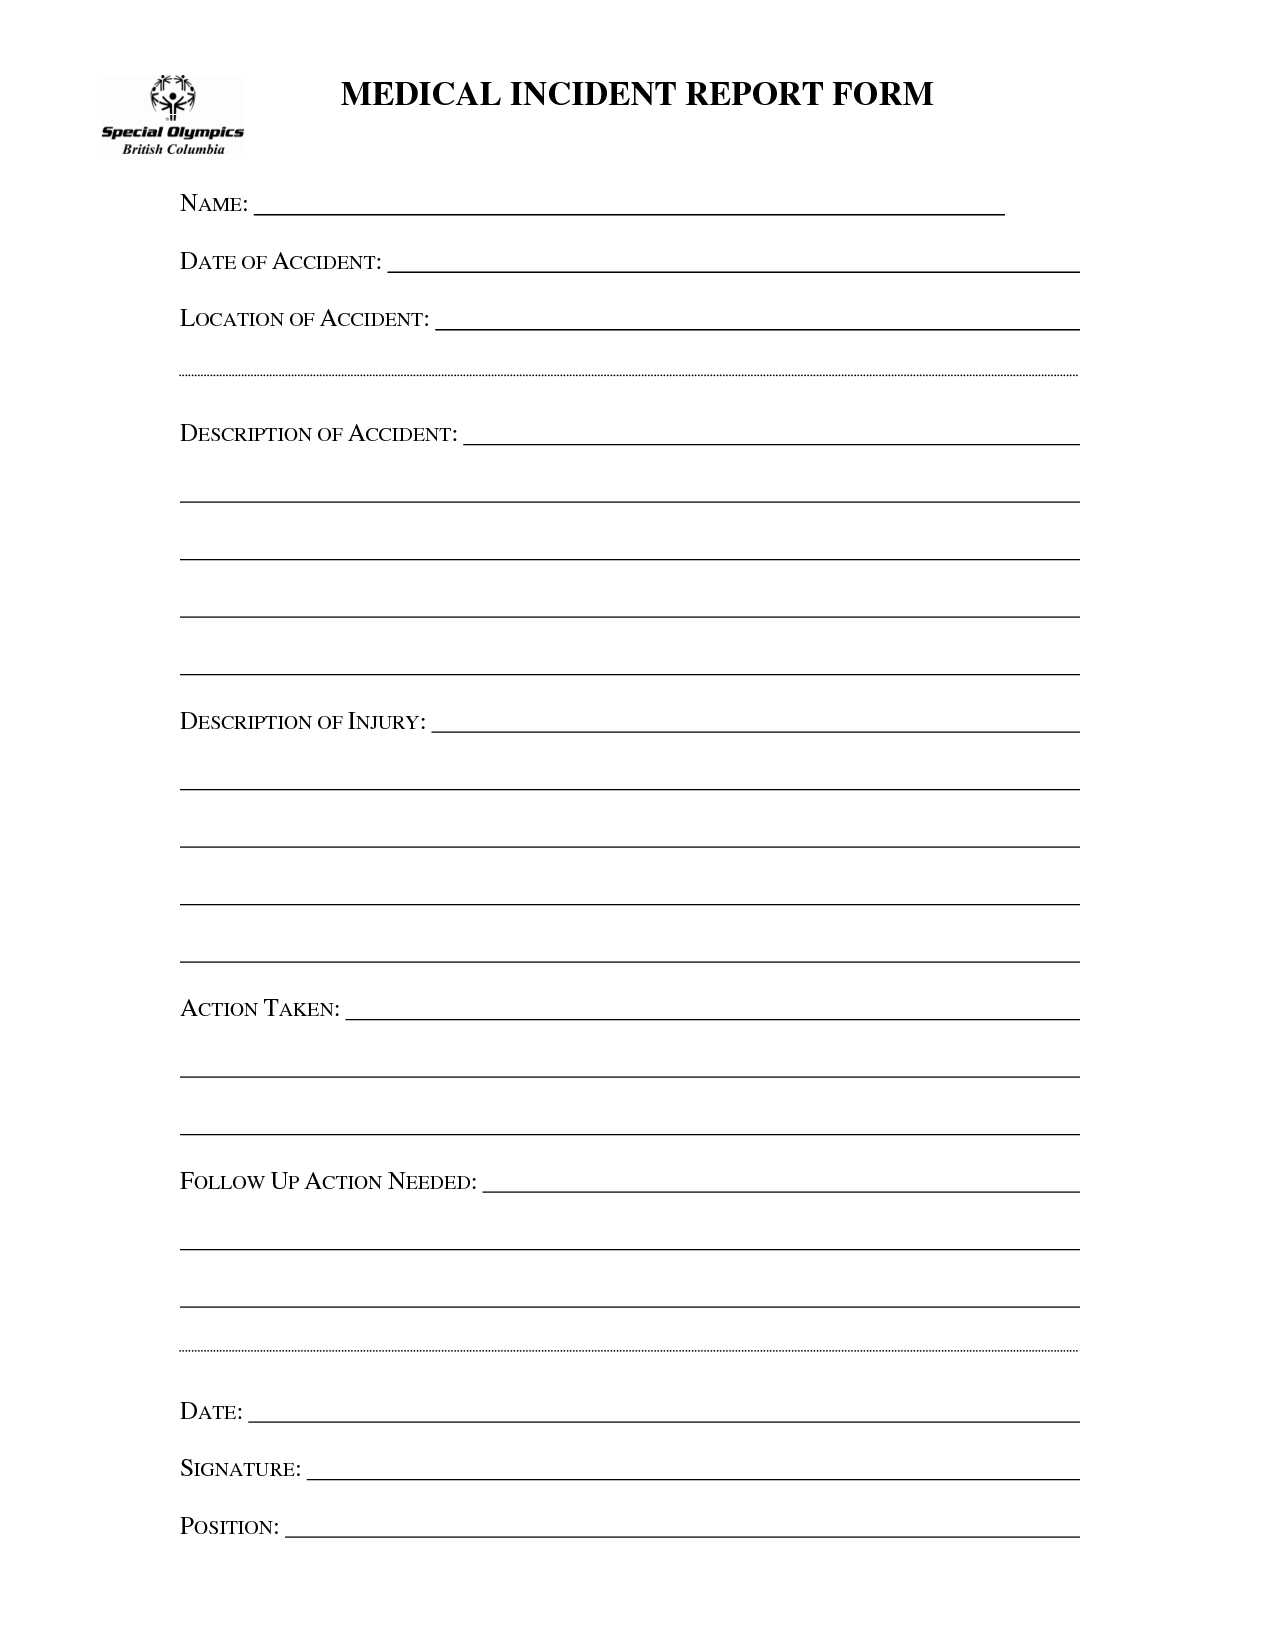 Medical Incident Report Form Template Within Office Incident Report Template